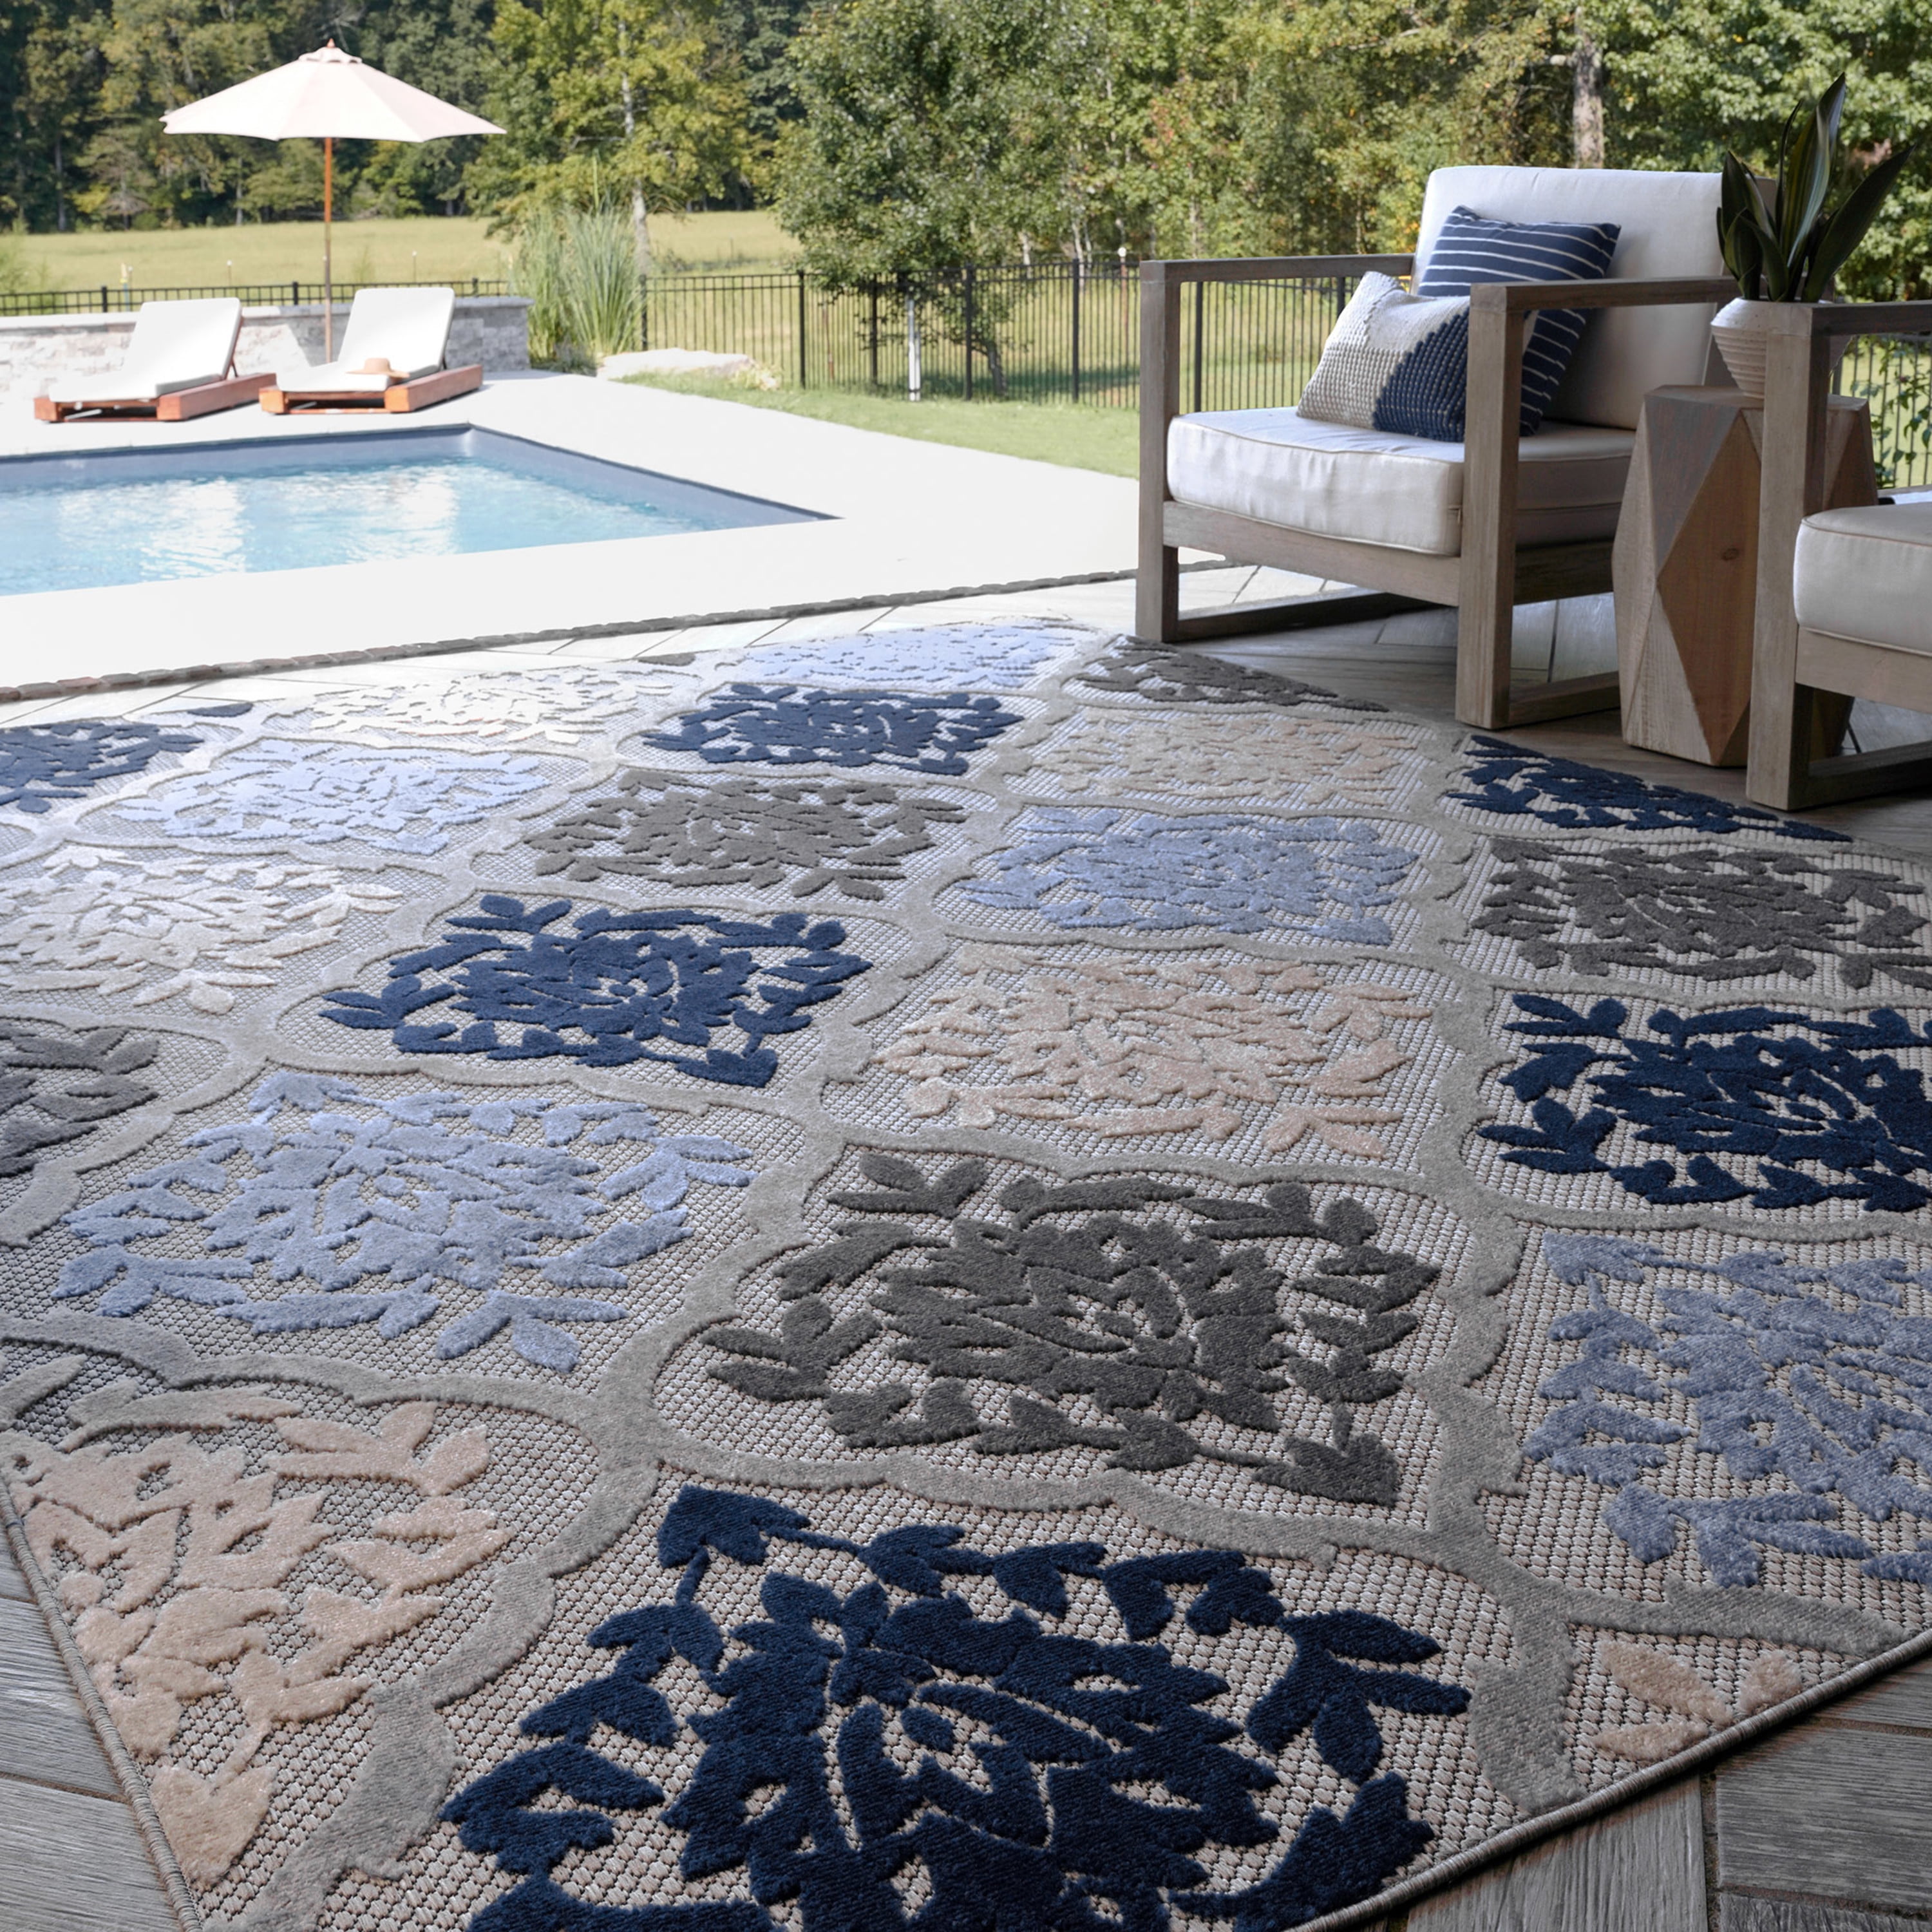 Bliss Rugs Oasis Modern Multi-Color Outdoor Area Rug, 8' x 10